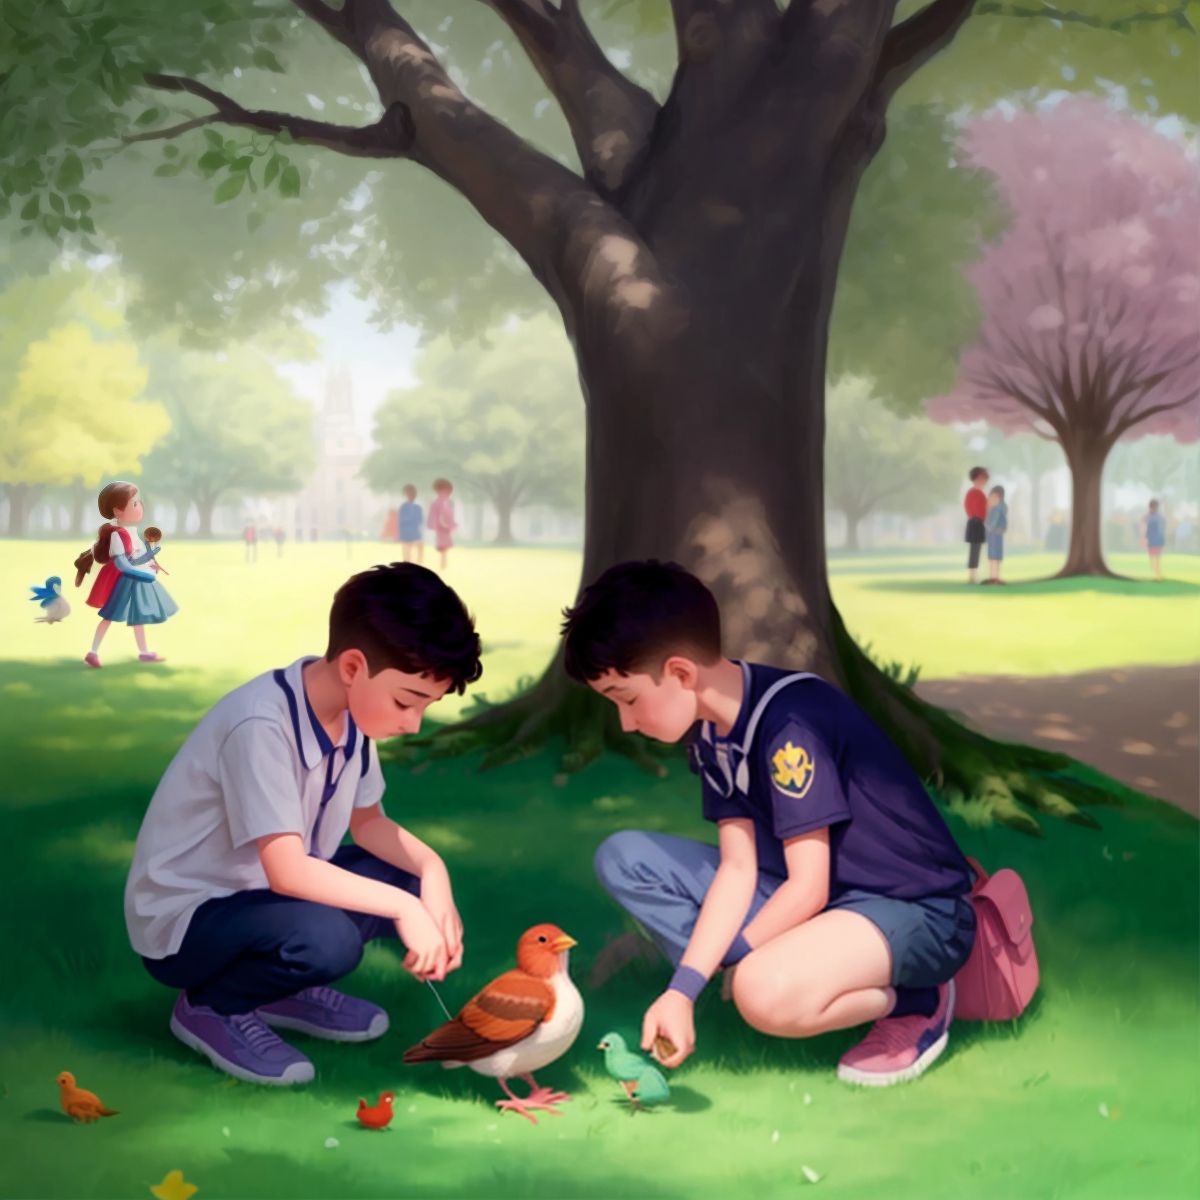 The club kids caring for an injured bird in the park under a tree.